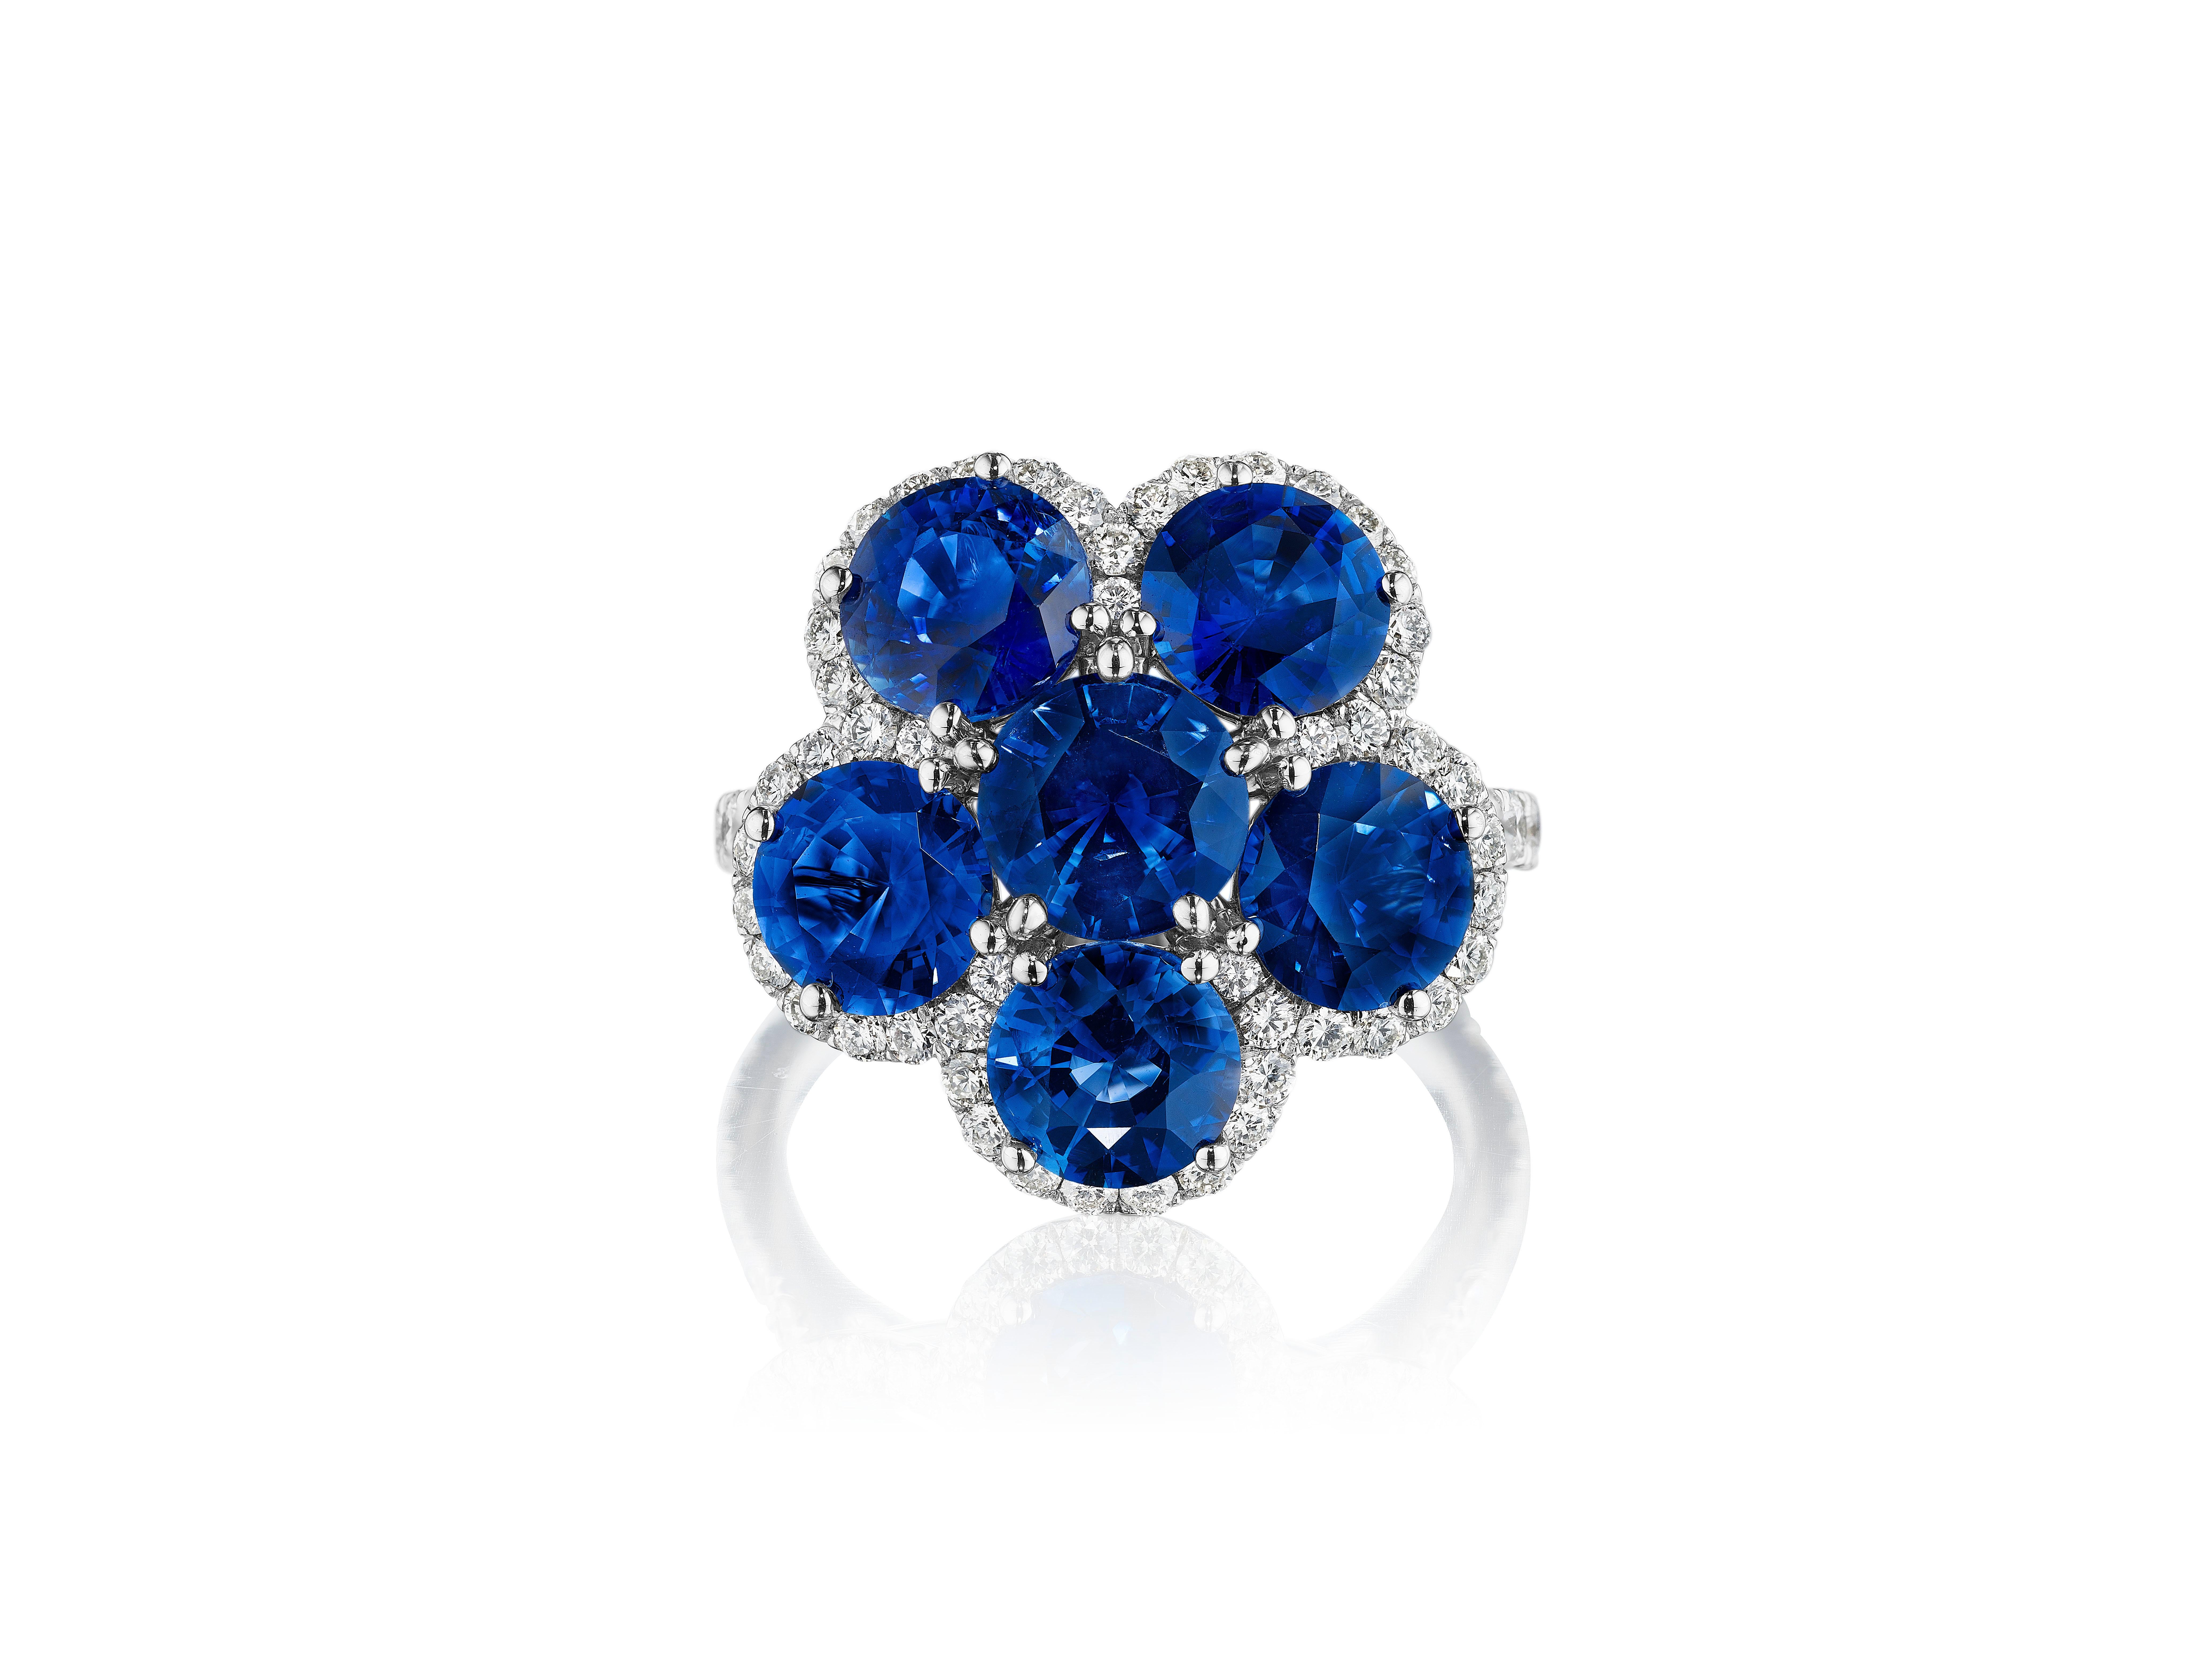 •	18KT White Gold
•	Size 6.5
•	7.38 Carats

•	Number of Round Sapphires: 6
•	Carat Weight: 6.39ctw

•	Number of Round Diamonds: 70
•	Carat Weight: 0.99ctw

•	A piece inspired by the elegance and beauty of the natural environment. 6 royal blue